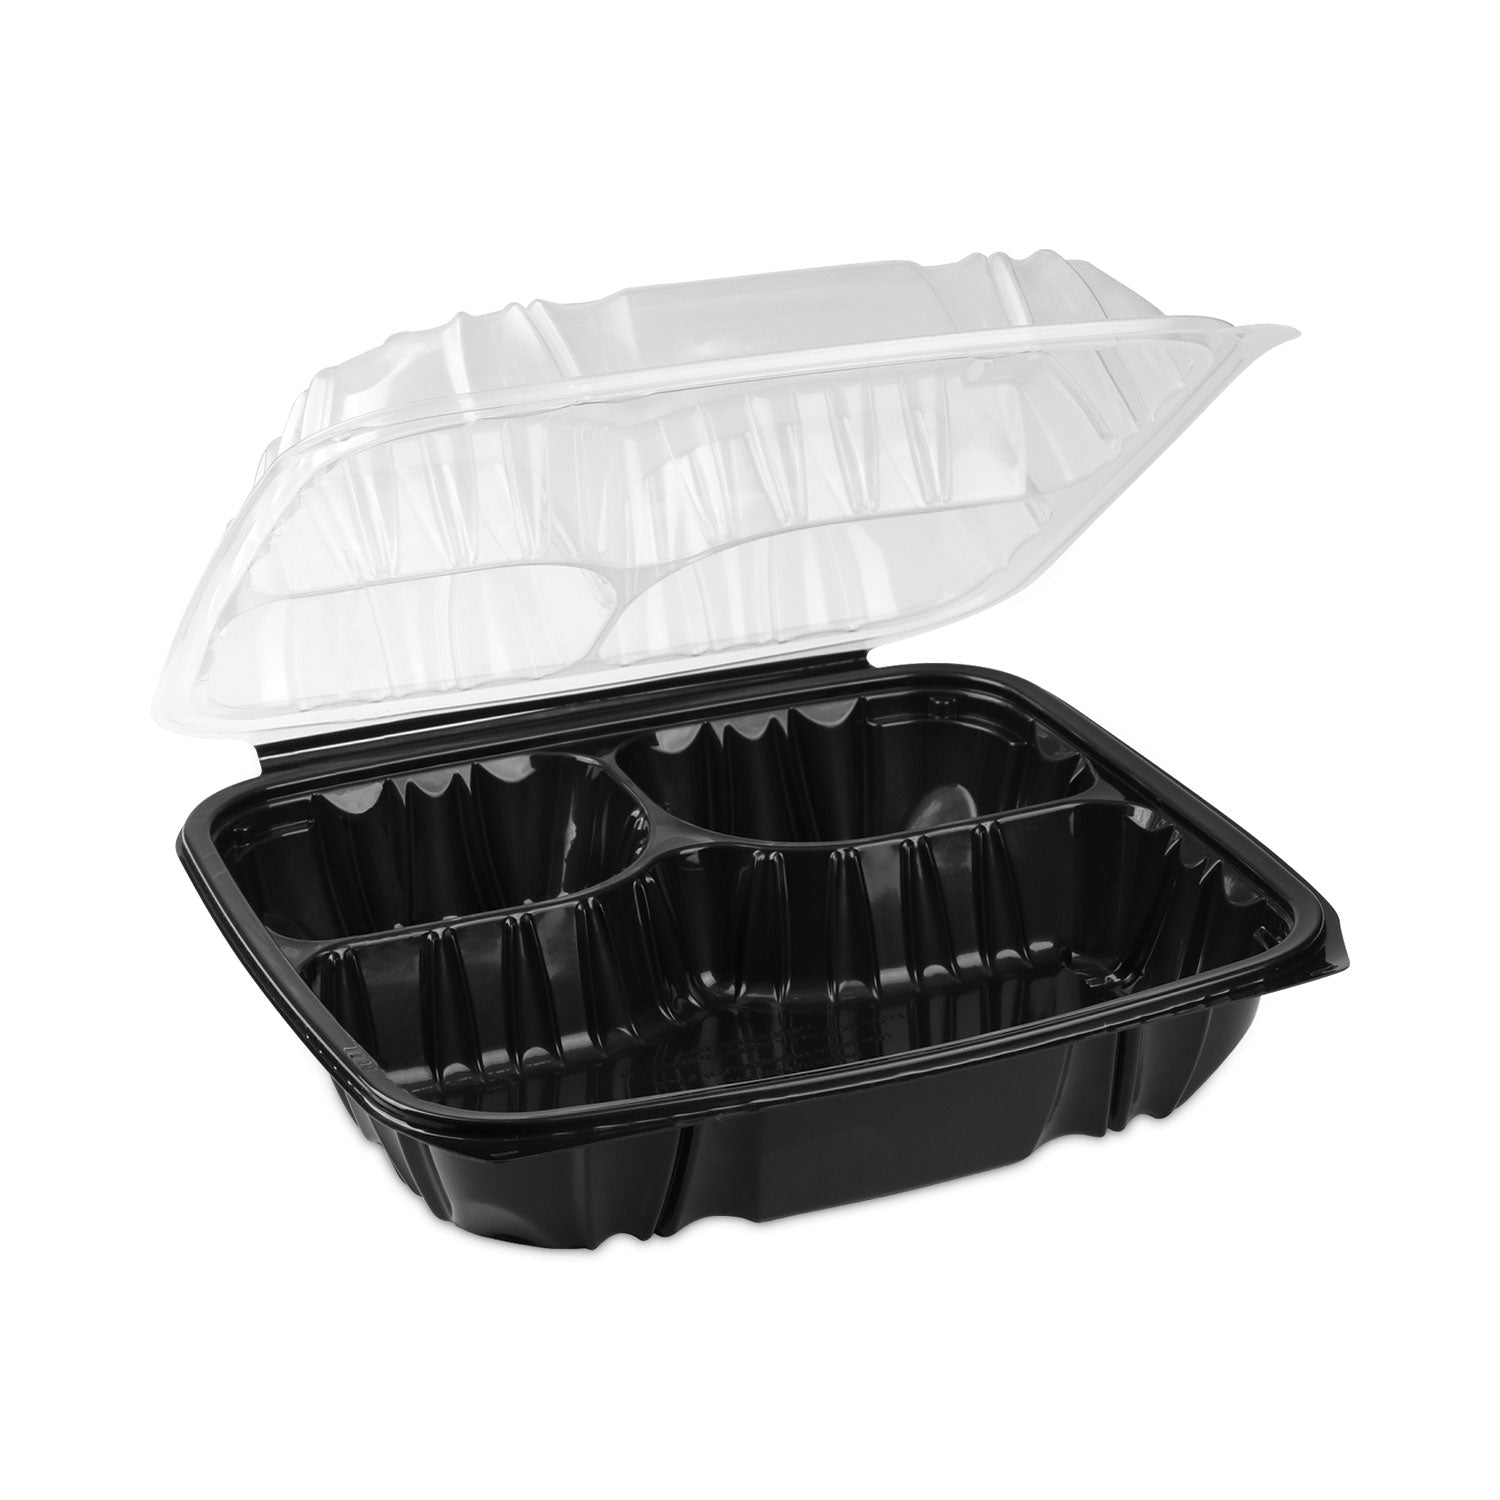 earthchoice-vented-dual-color-microwavable-hinged-lid-container-3-comp-base-lid-34-oz-105x95x3-blk-clr-plastic-132-ct_pctdc109330b000 - 2